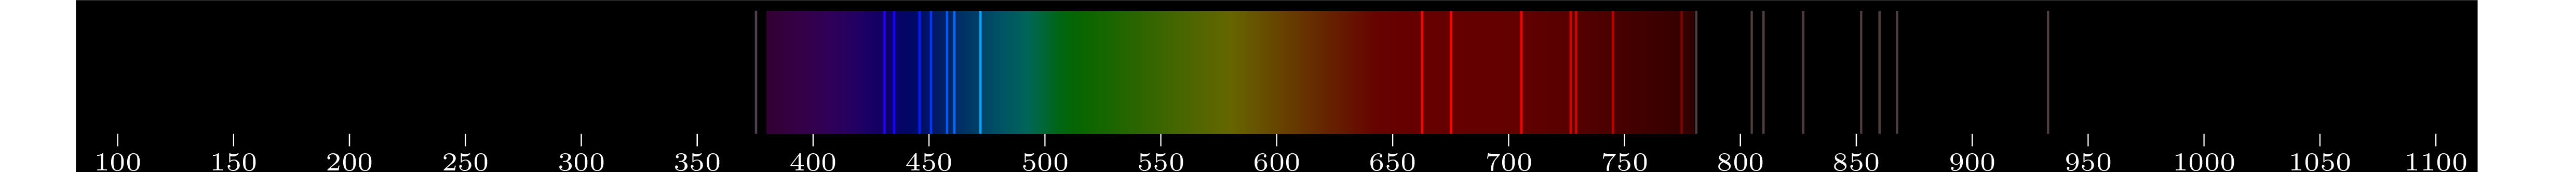 emmision spectra of element Rn